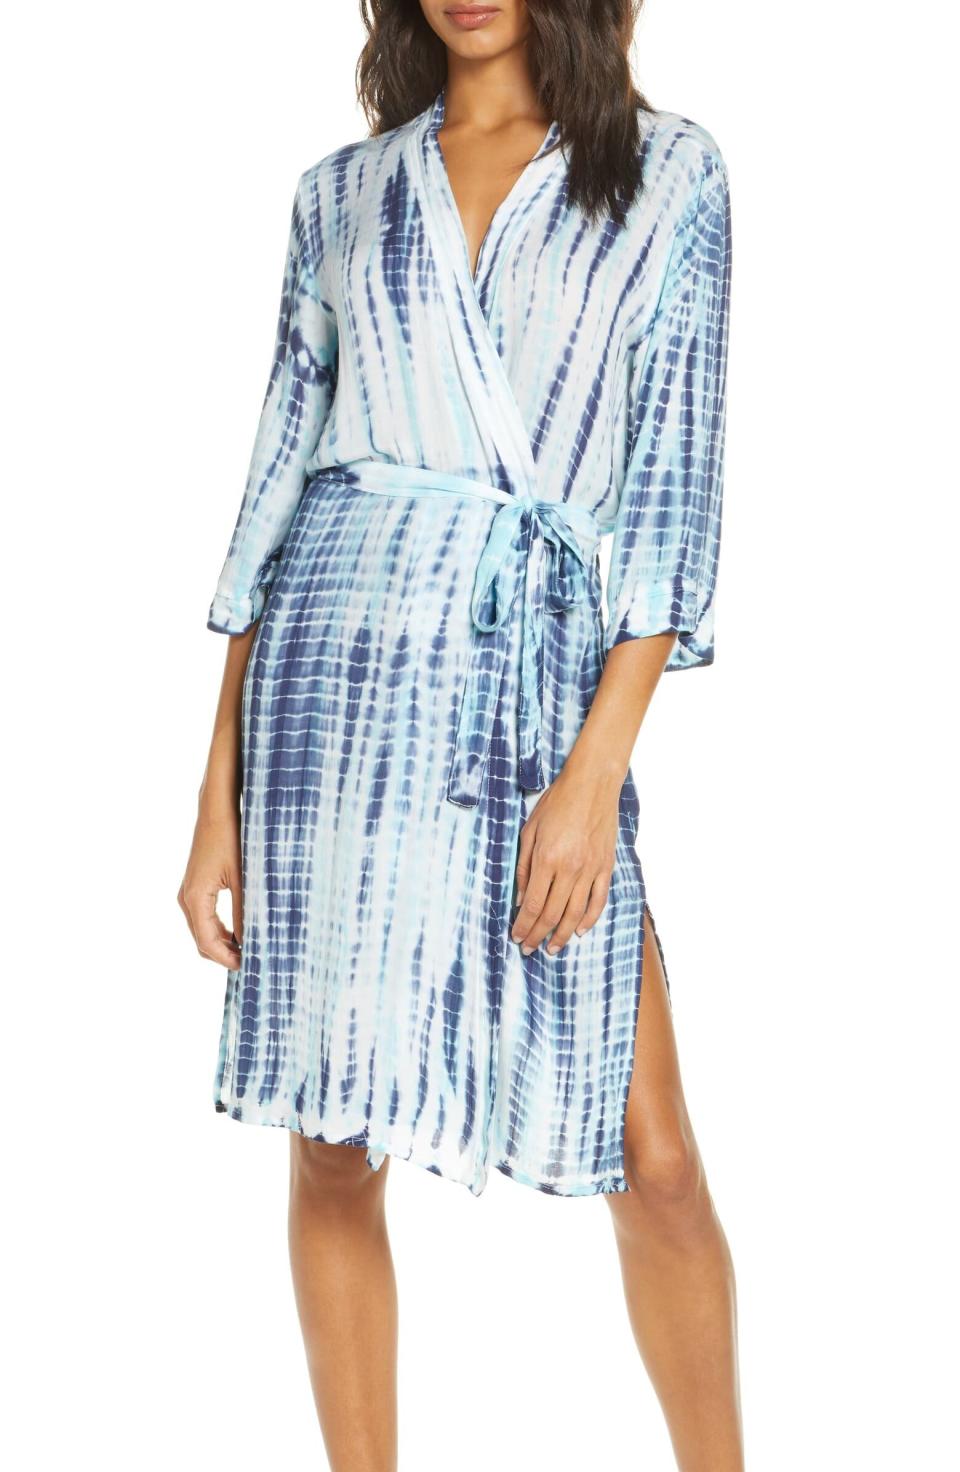 It comes in sizes XS to L. <a href="The Most Extravagant Robes To Feel Fancy Around The House" target="_blank" rel="noopener noreferrer">Find it for $80 at Nordstrom</a>.